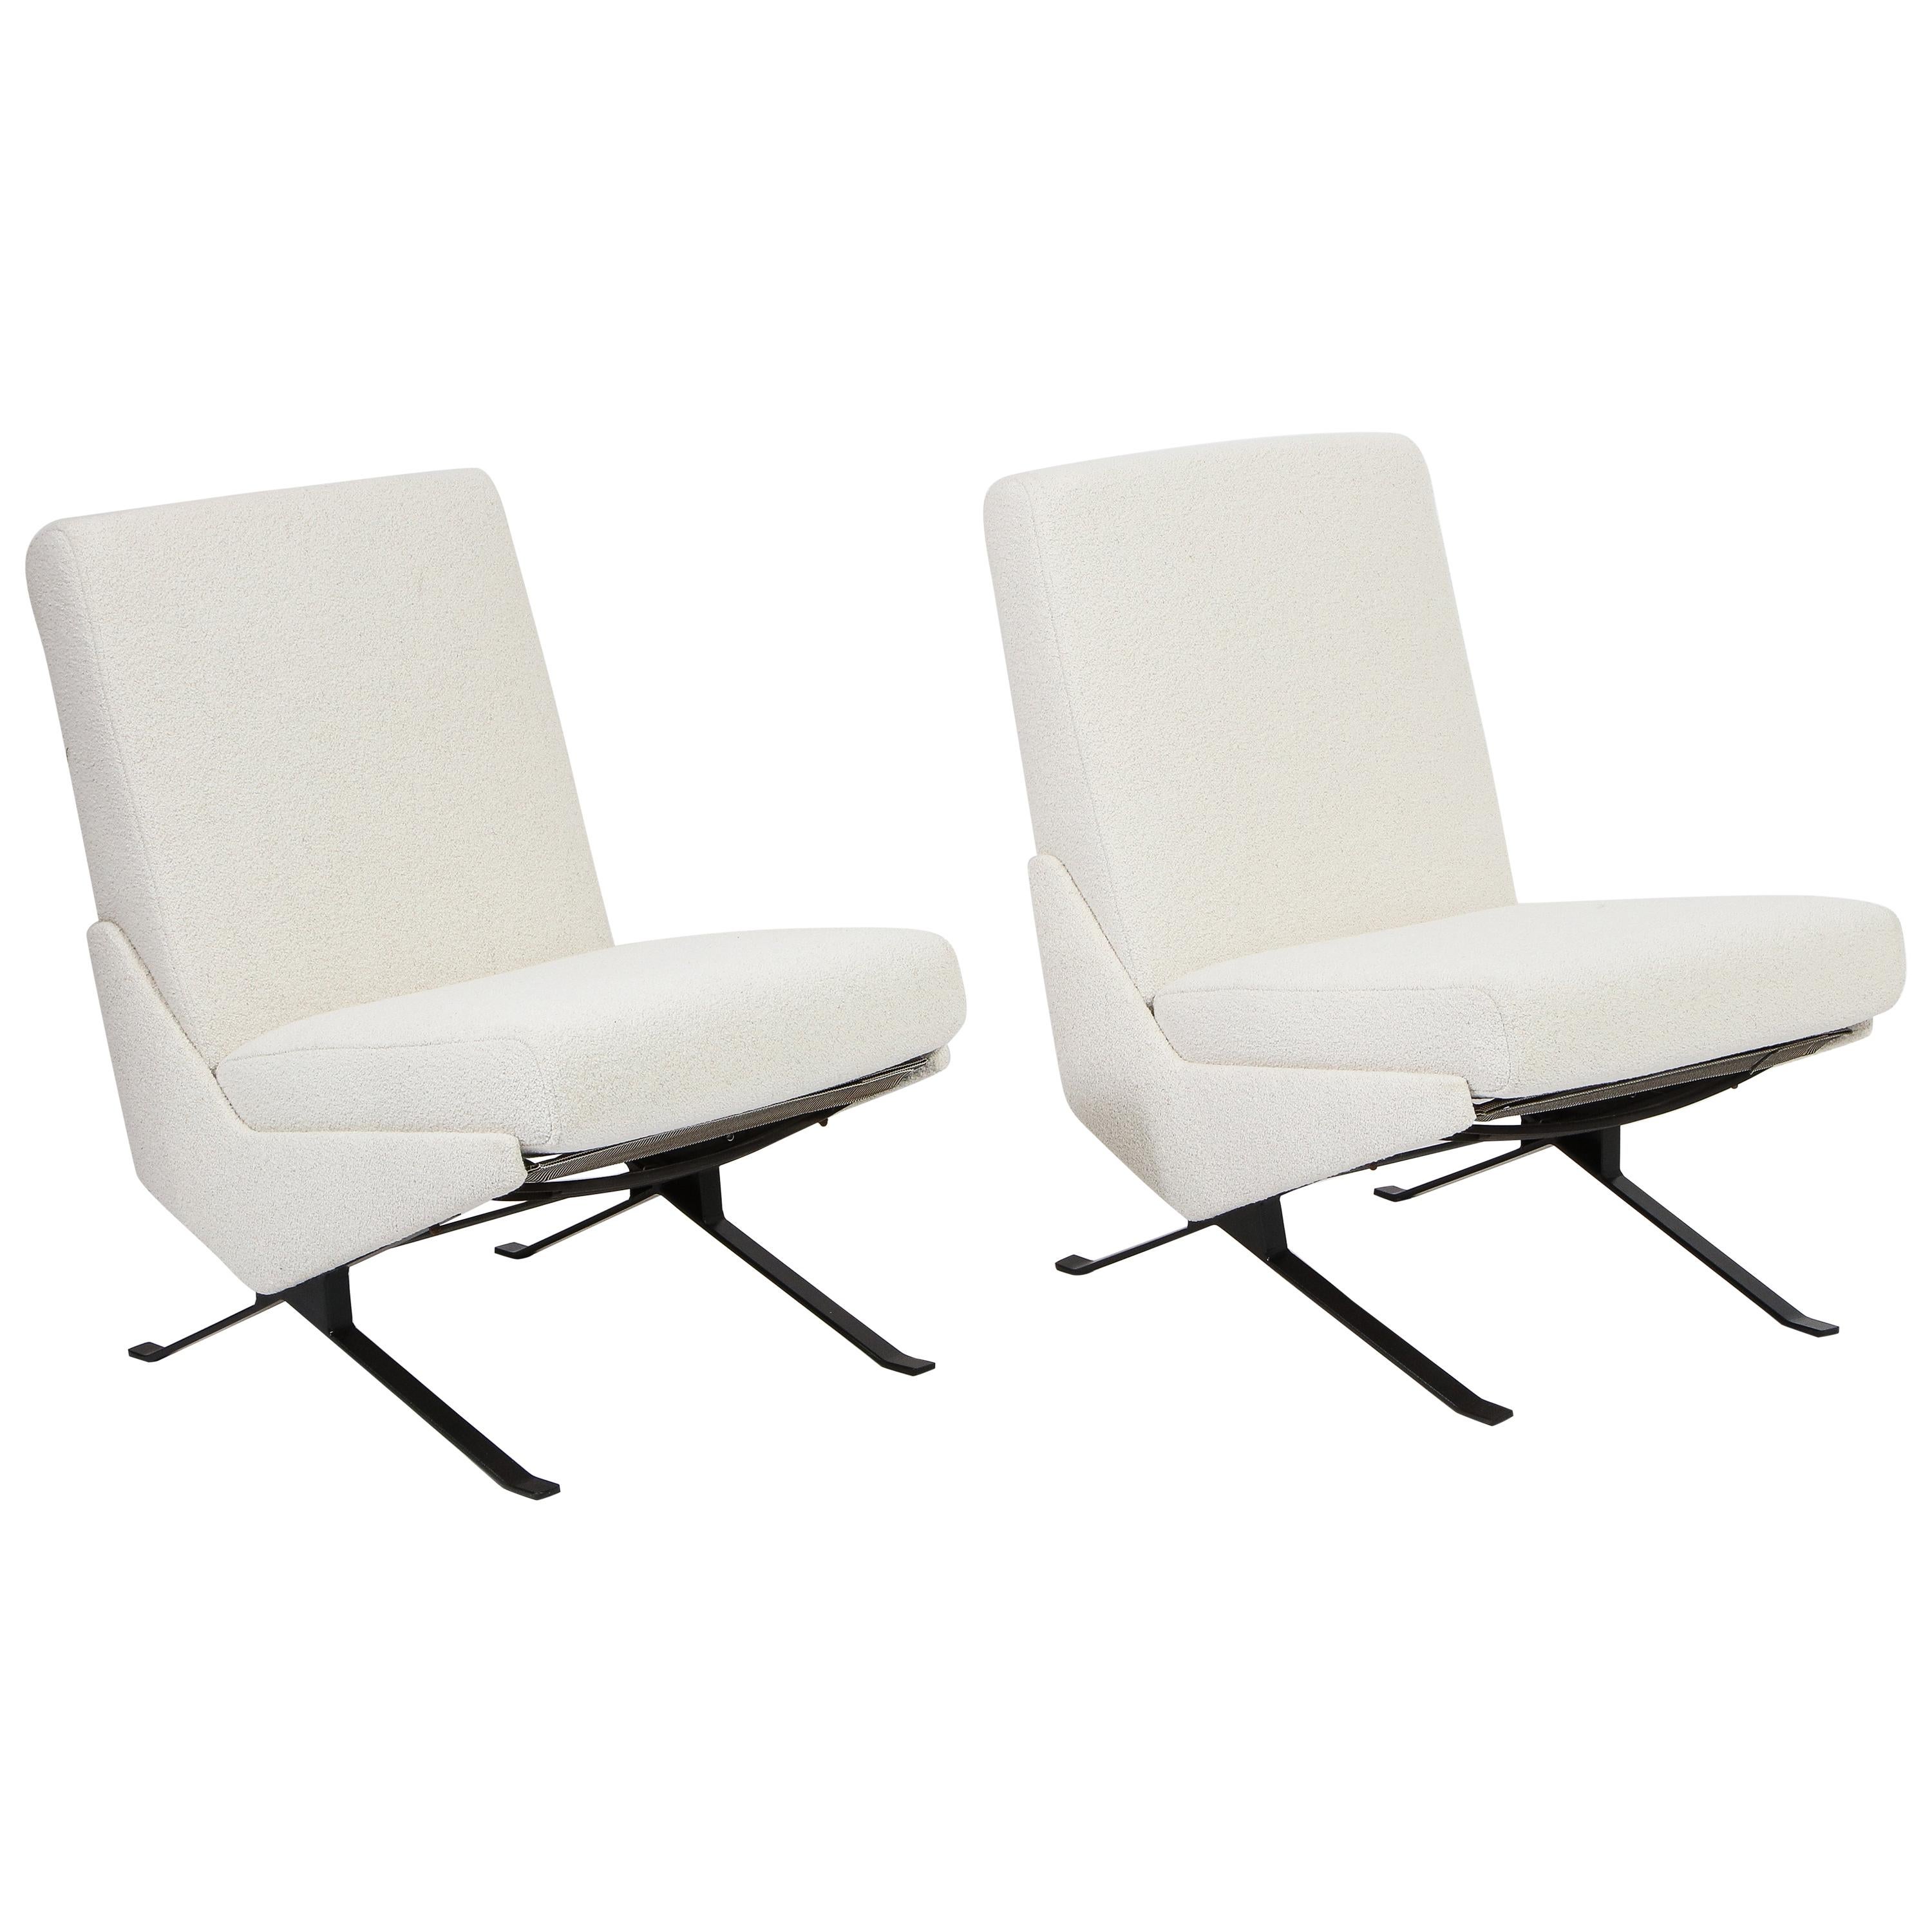 Pair of White Troika Slipper Chairs by Pierre Guariche for Airborne, France 1960